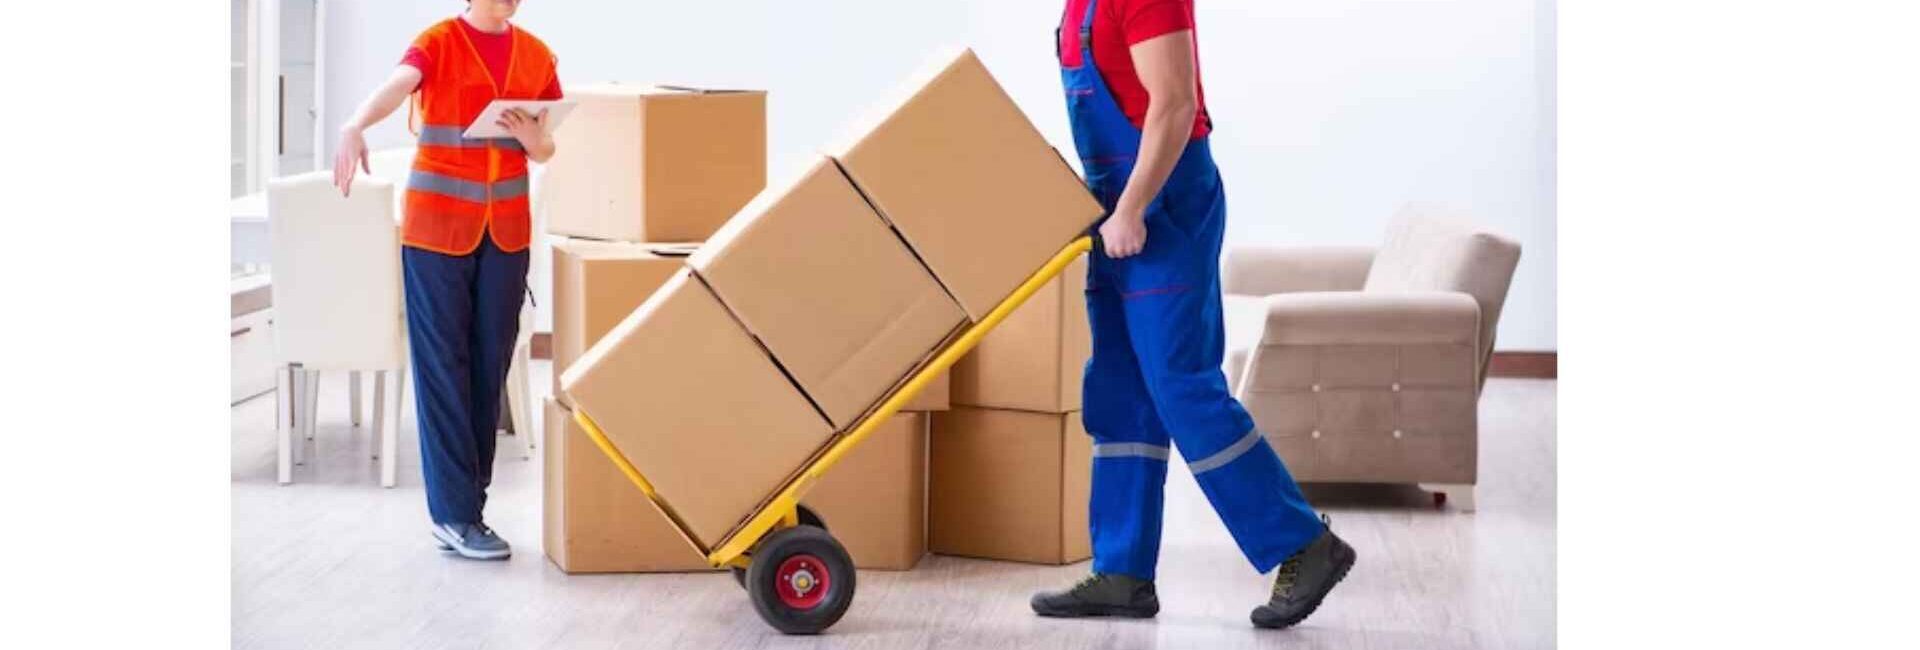 Acutime Packers And Movers - Best Packers and Movers in Noida